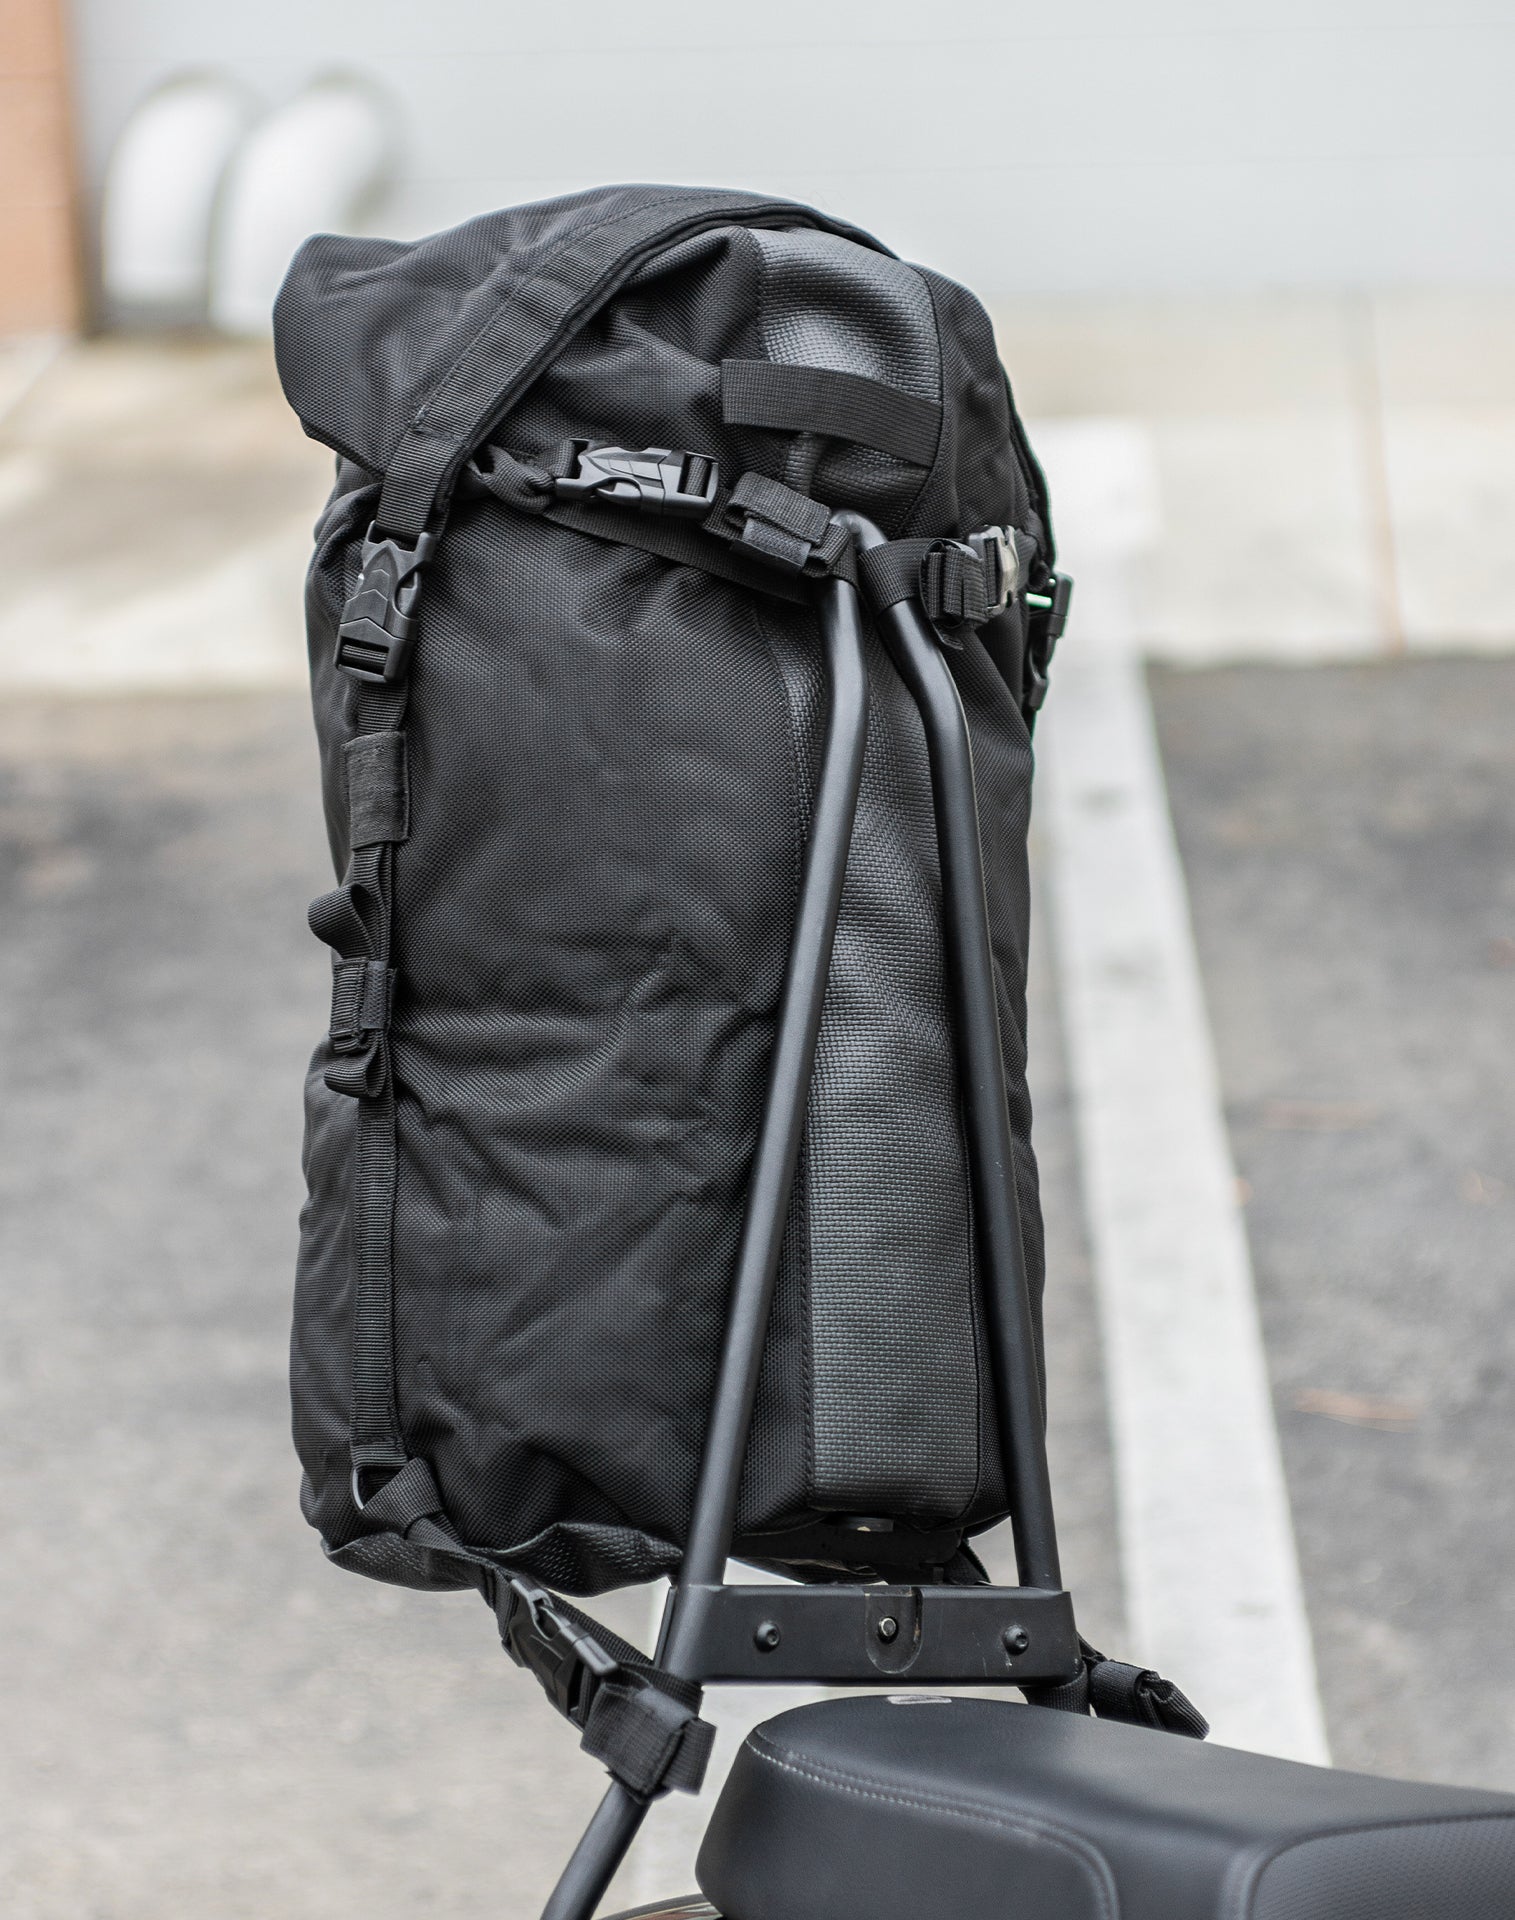 35L - Renegade XL Hyosung Motorcycle Dry Backpack